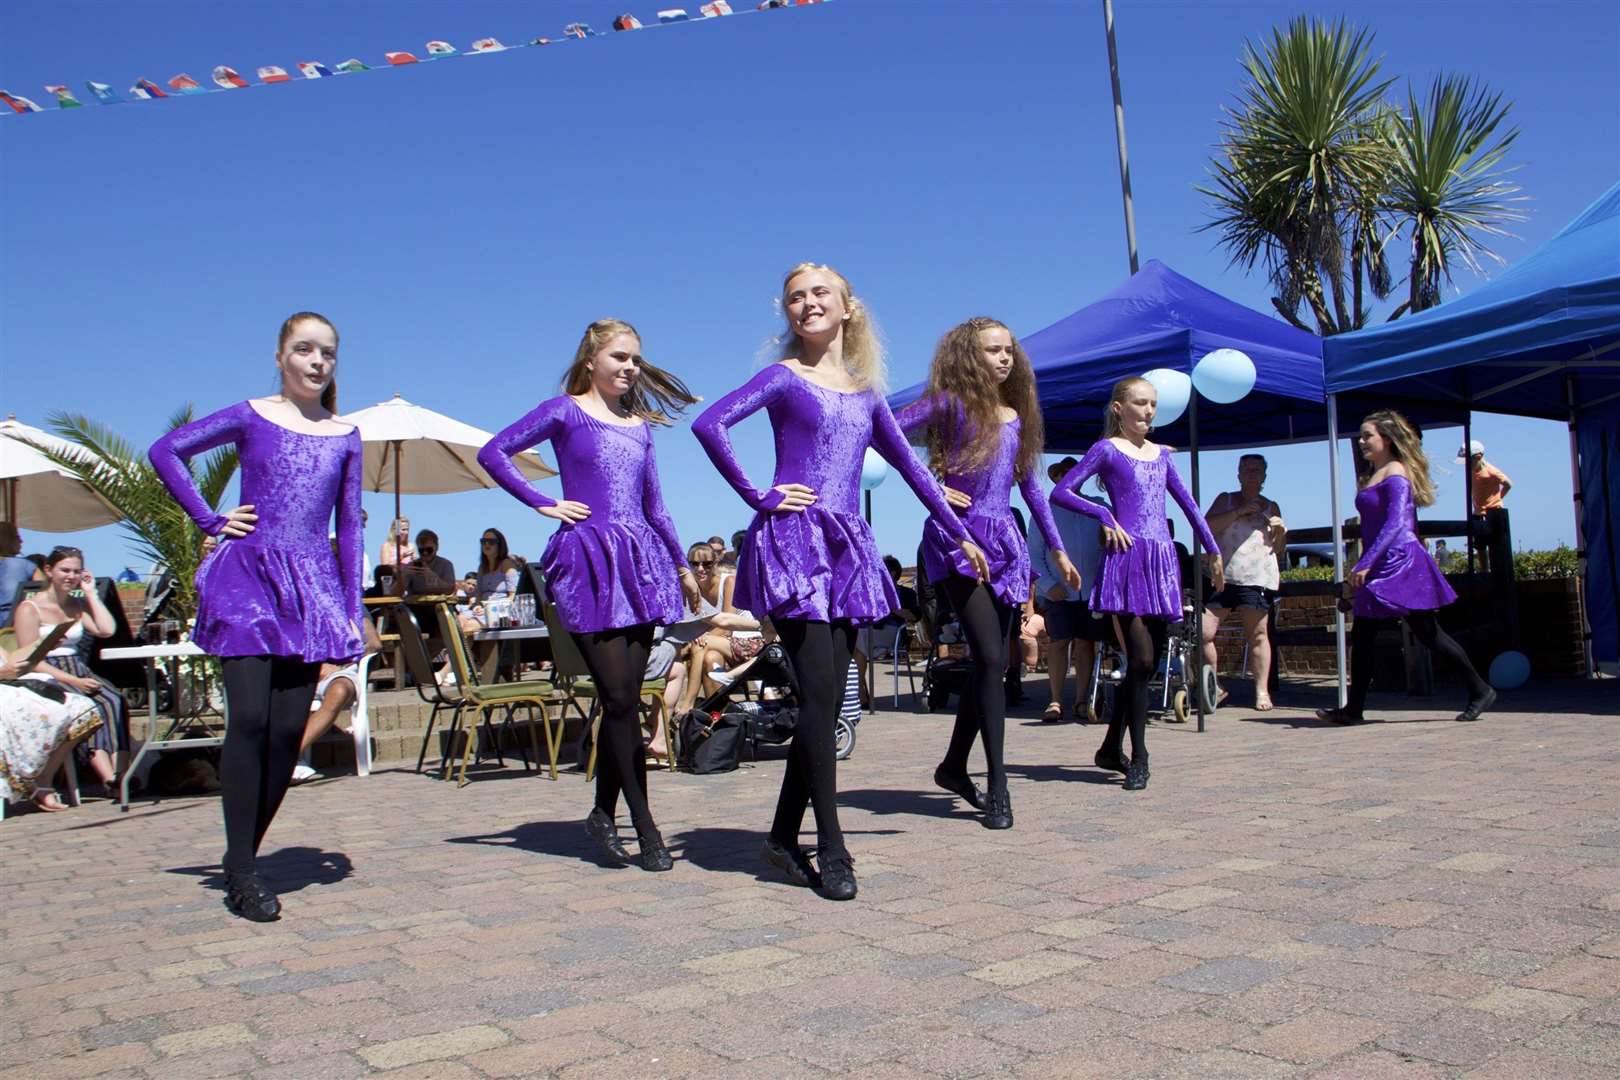 Dancers at last year's event in Deal